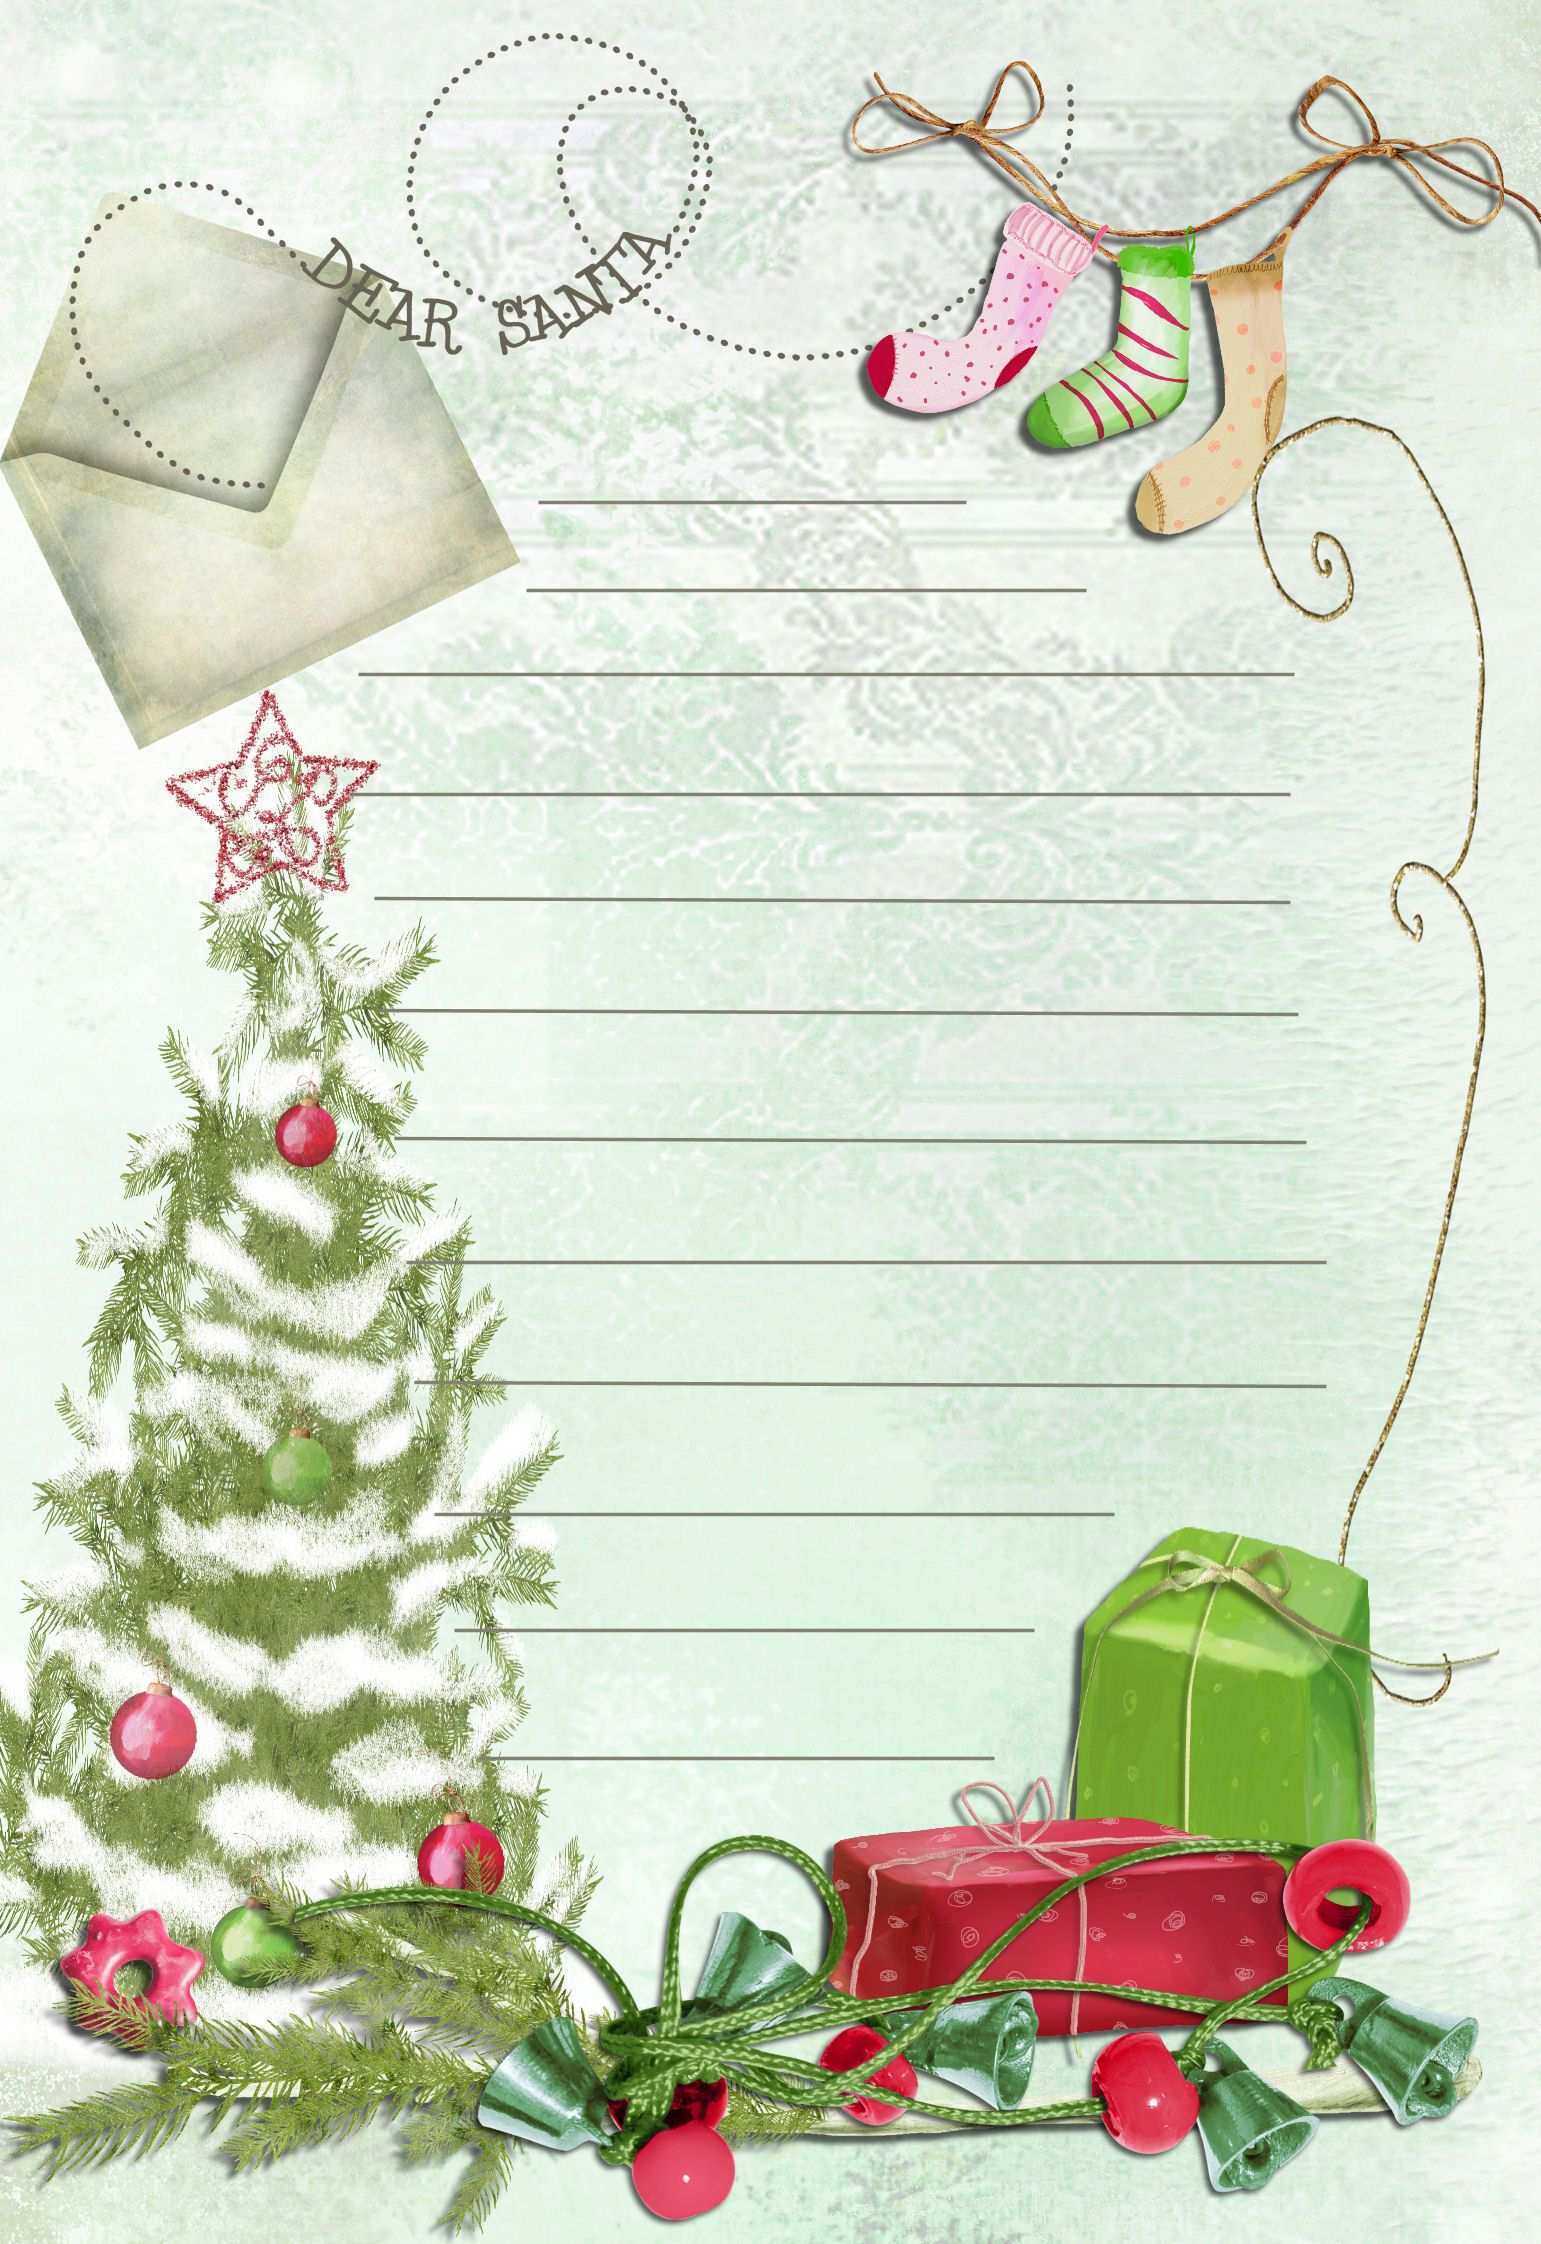 Christmas Card Note Template – Cards Design Templates Throughout Christmas Note Card Templates